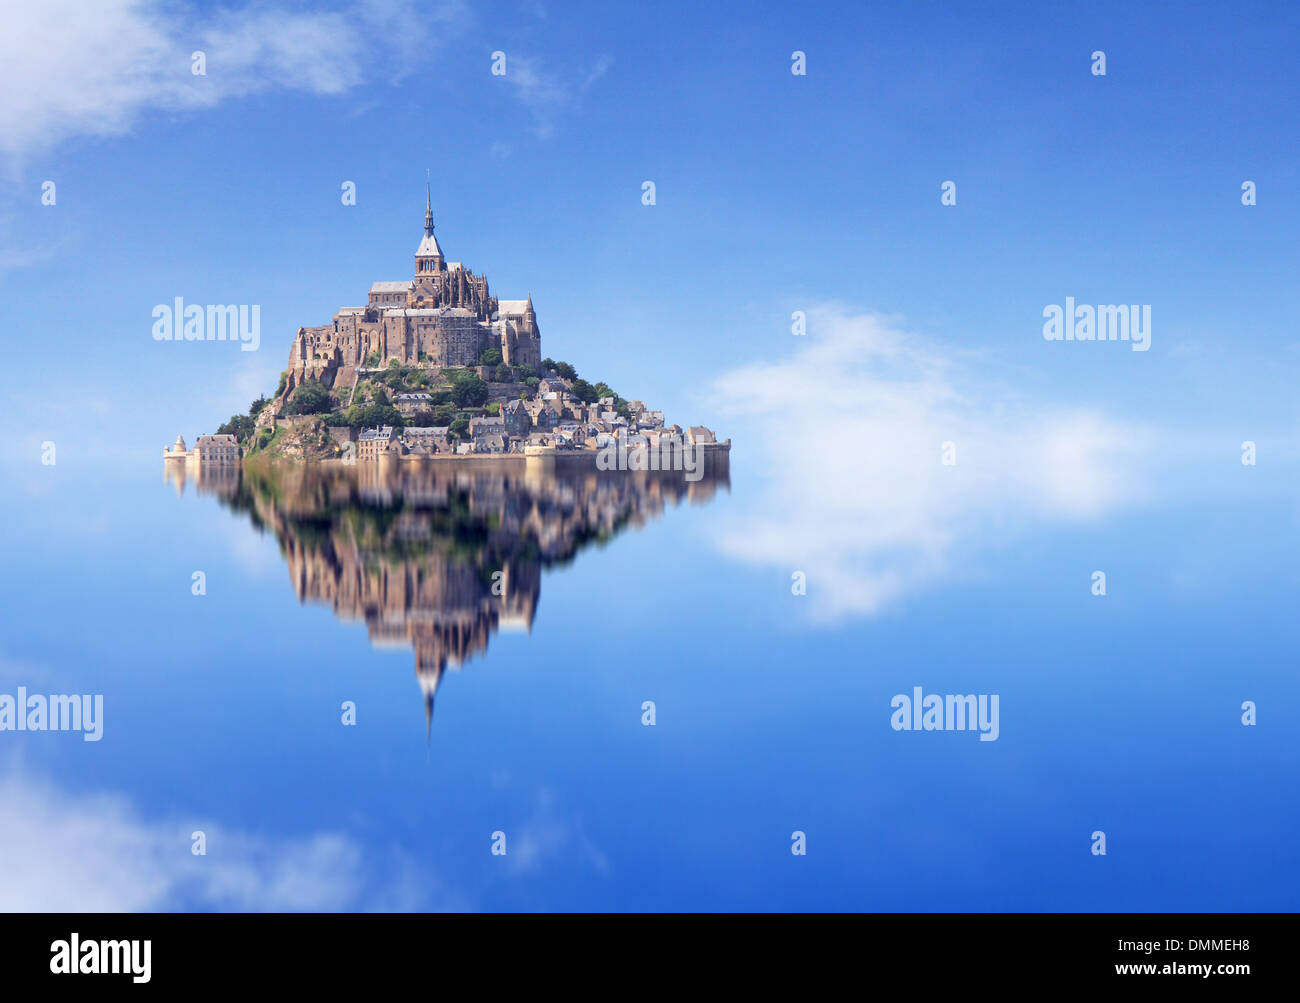 Le Mont Saint Michel, an UNESCO world heritage site in France, with reflection Stock Photo